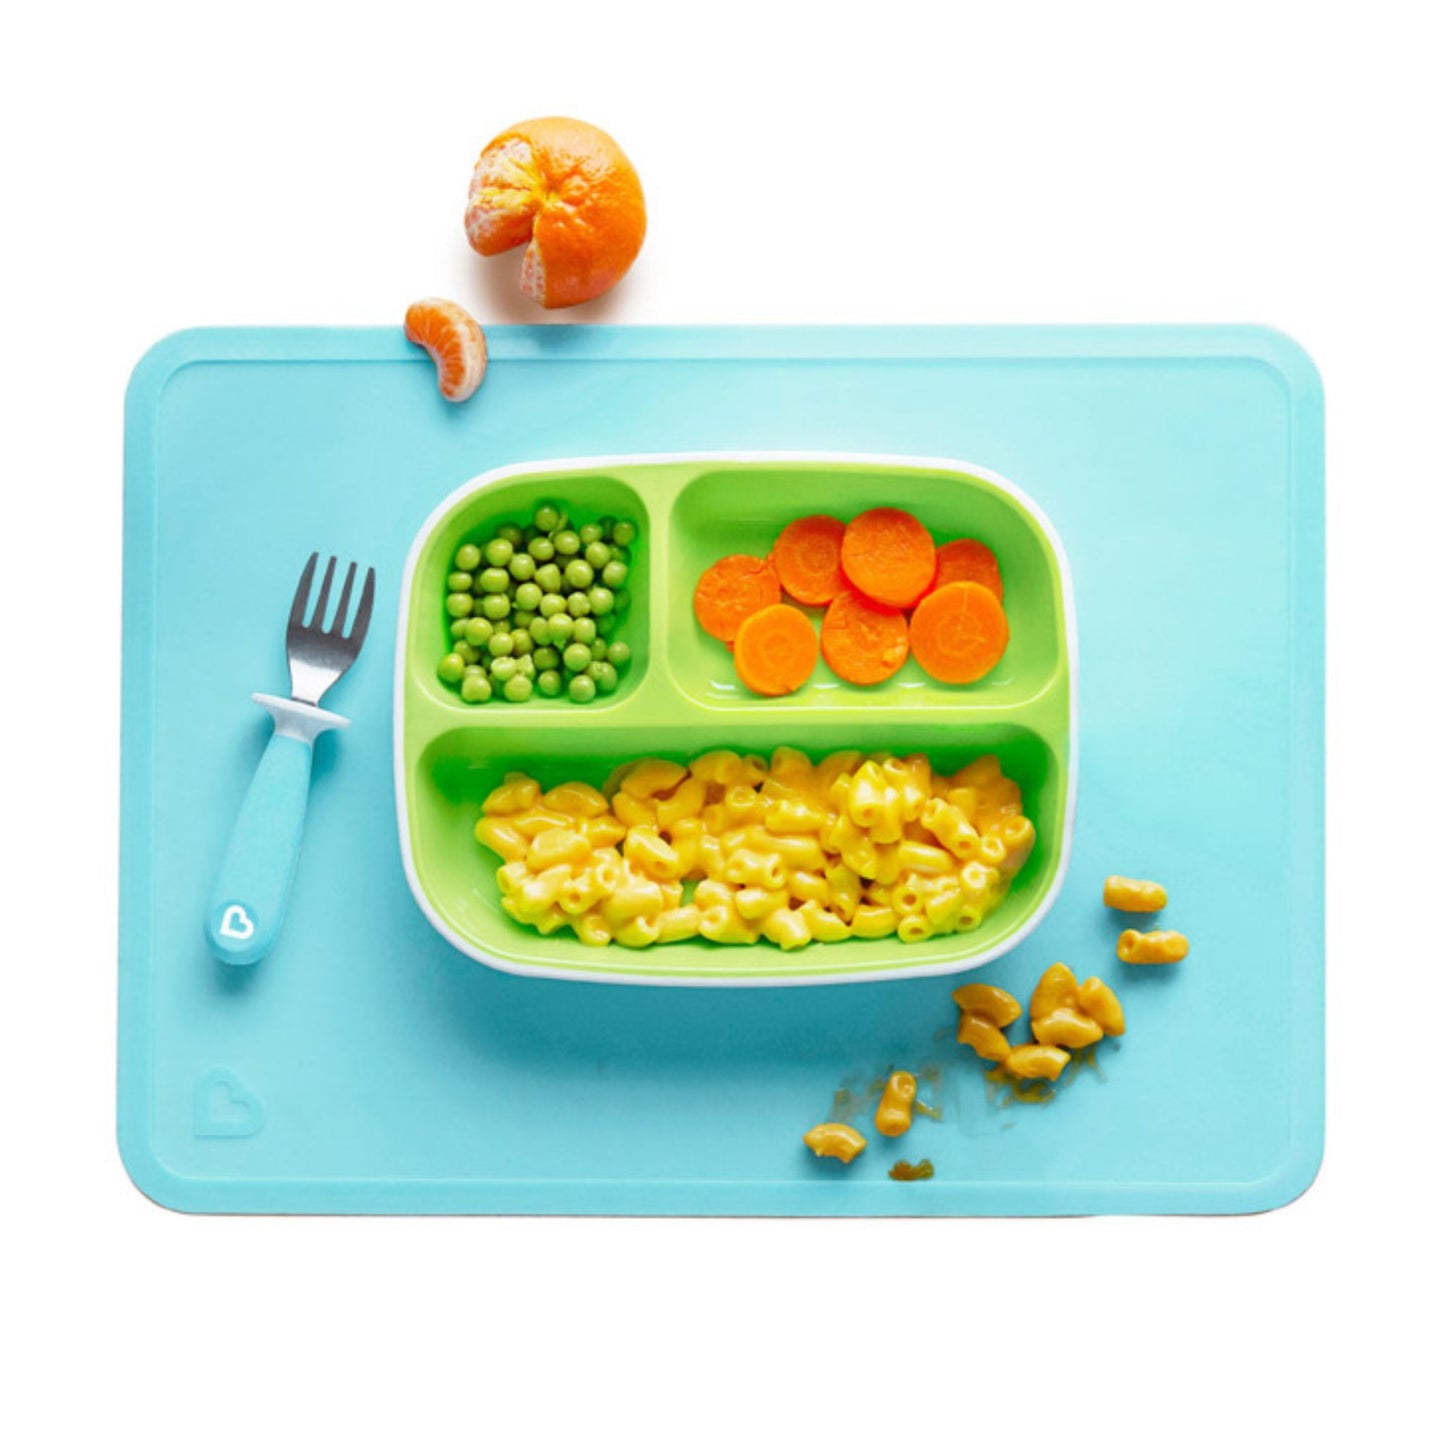 Munchkin Spotless ™ Silicone Placemats - 2 Pack